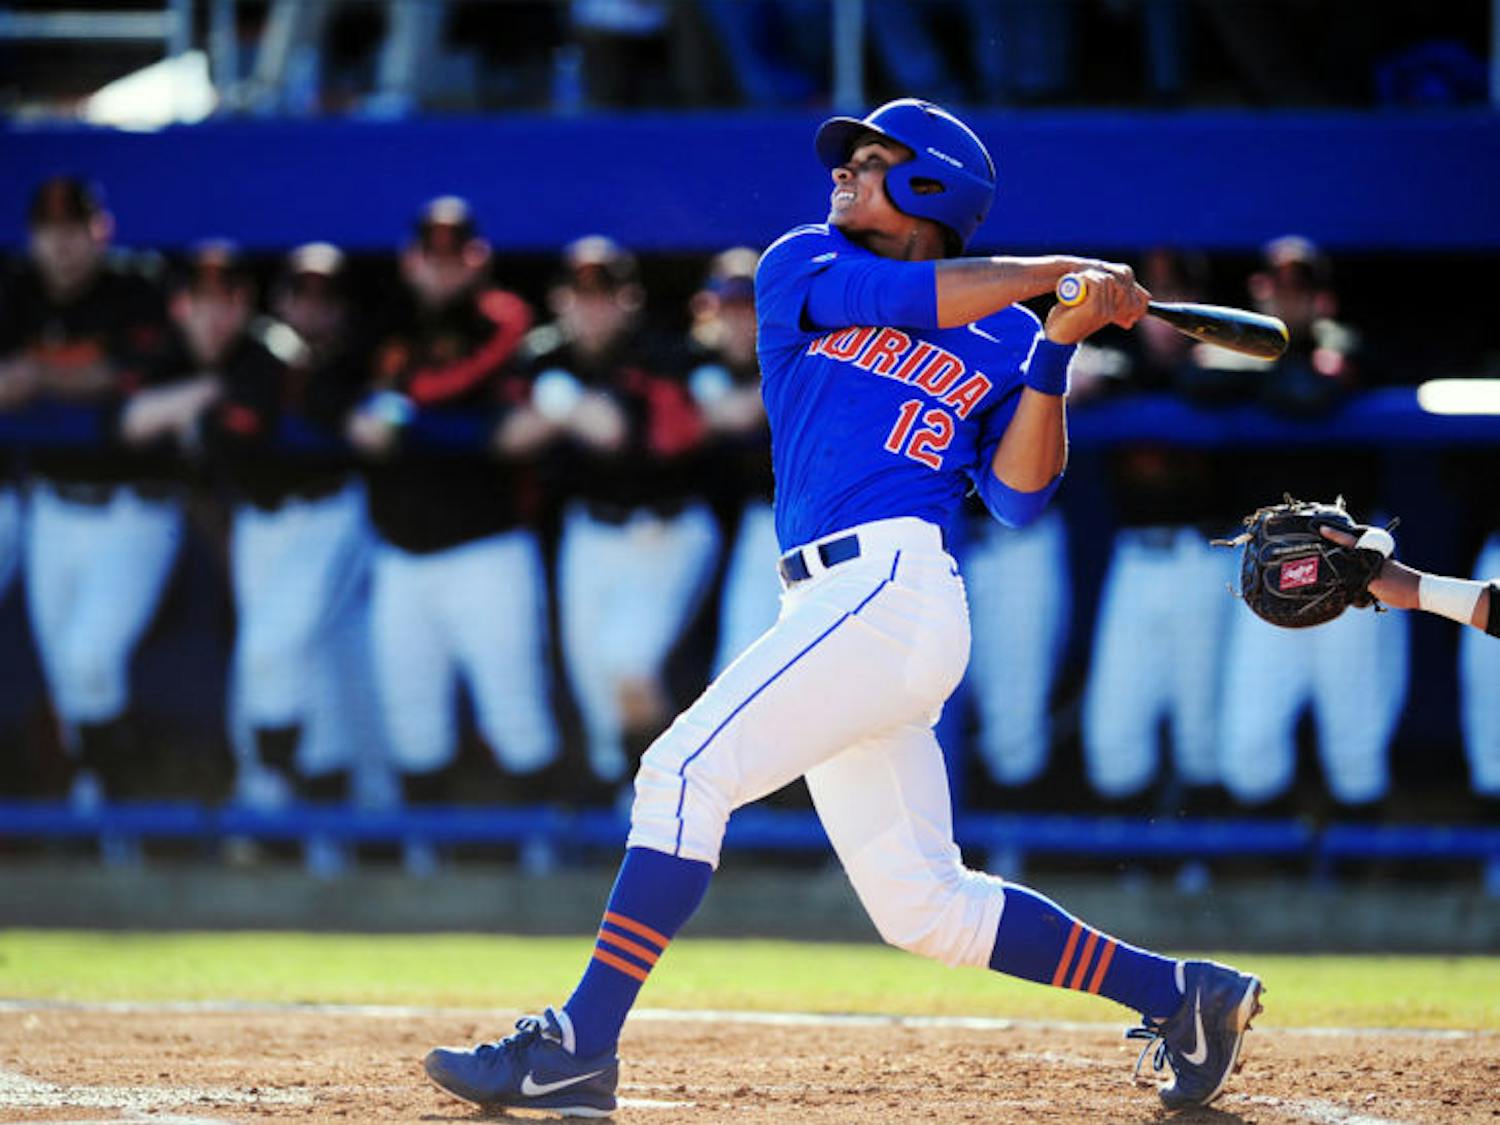 Richie Martin hits during Florida’s 9-7 loss to Maryland on Saturday at McKethan Stadium. Martin leads the team with a .455 batting average after the Gators’ three-game, season-opening series win.